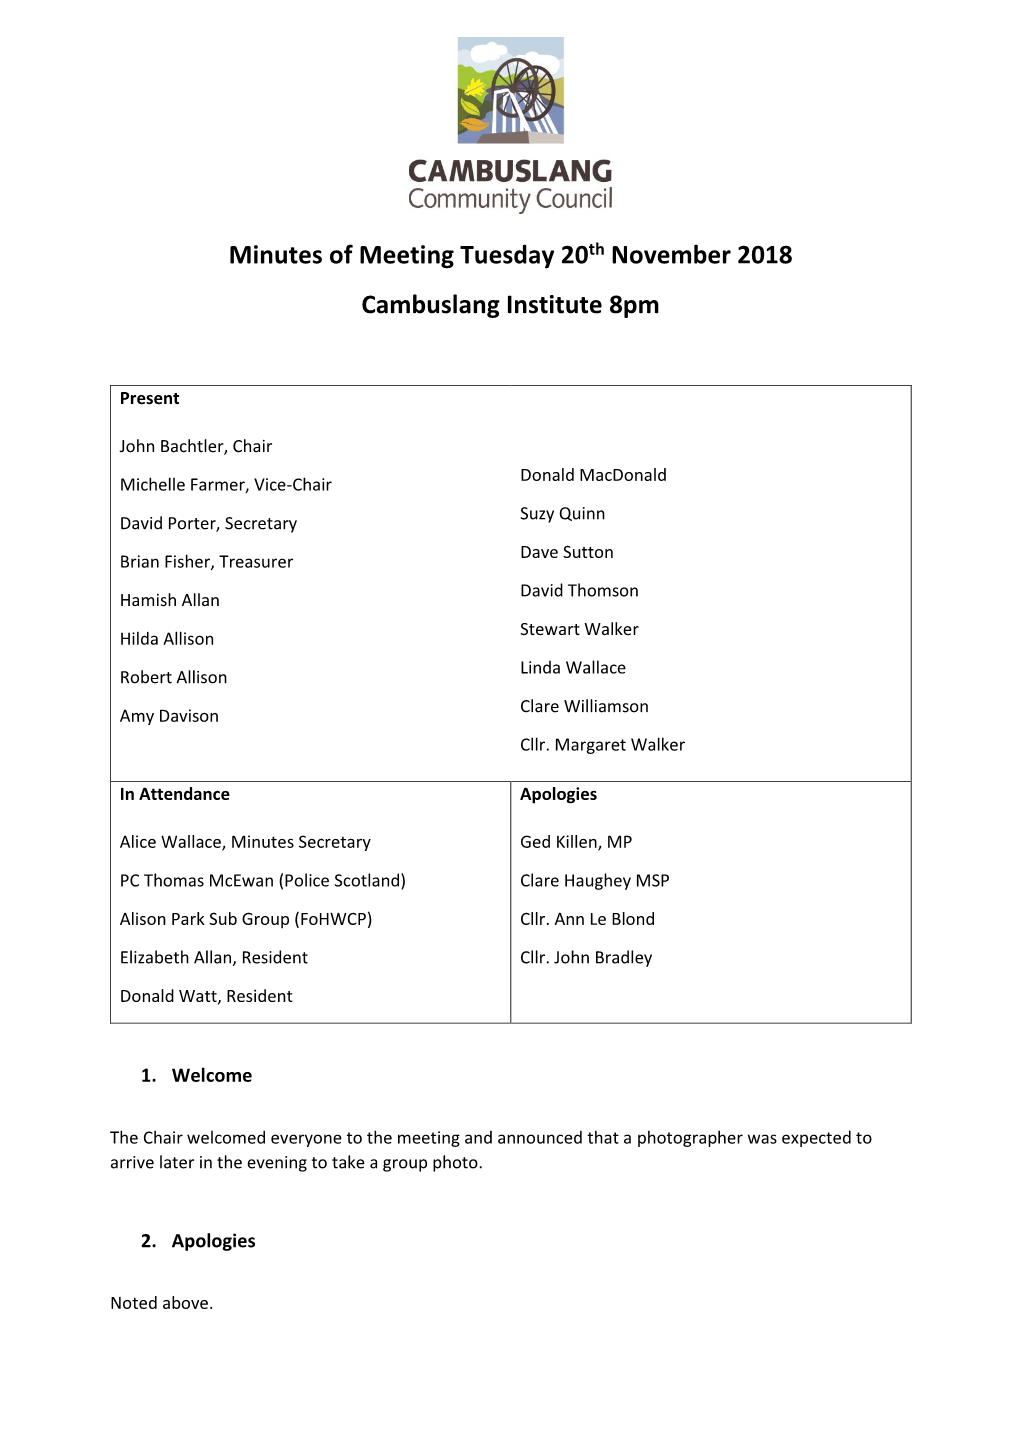 Minutes of Meeting Tuesday 20Th November 2018 Cambuslang Institute 8Pm